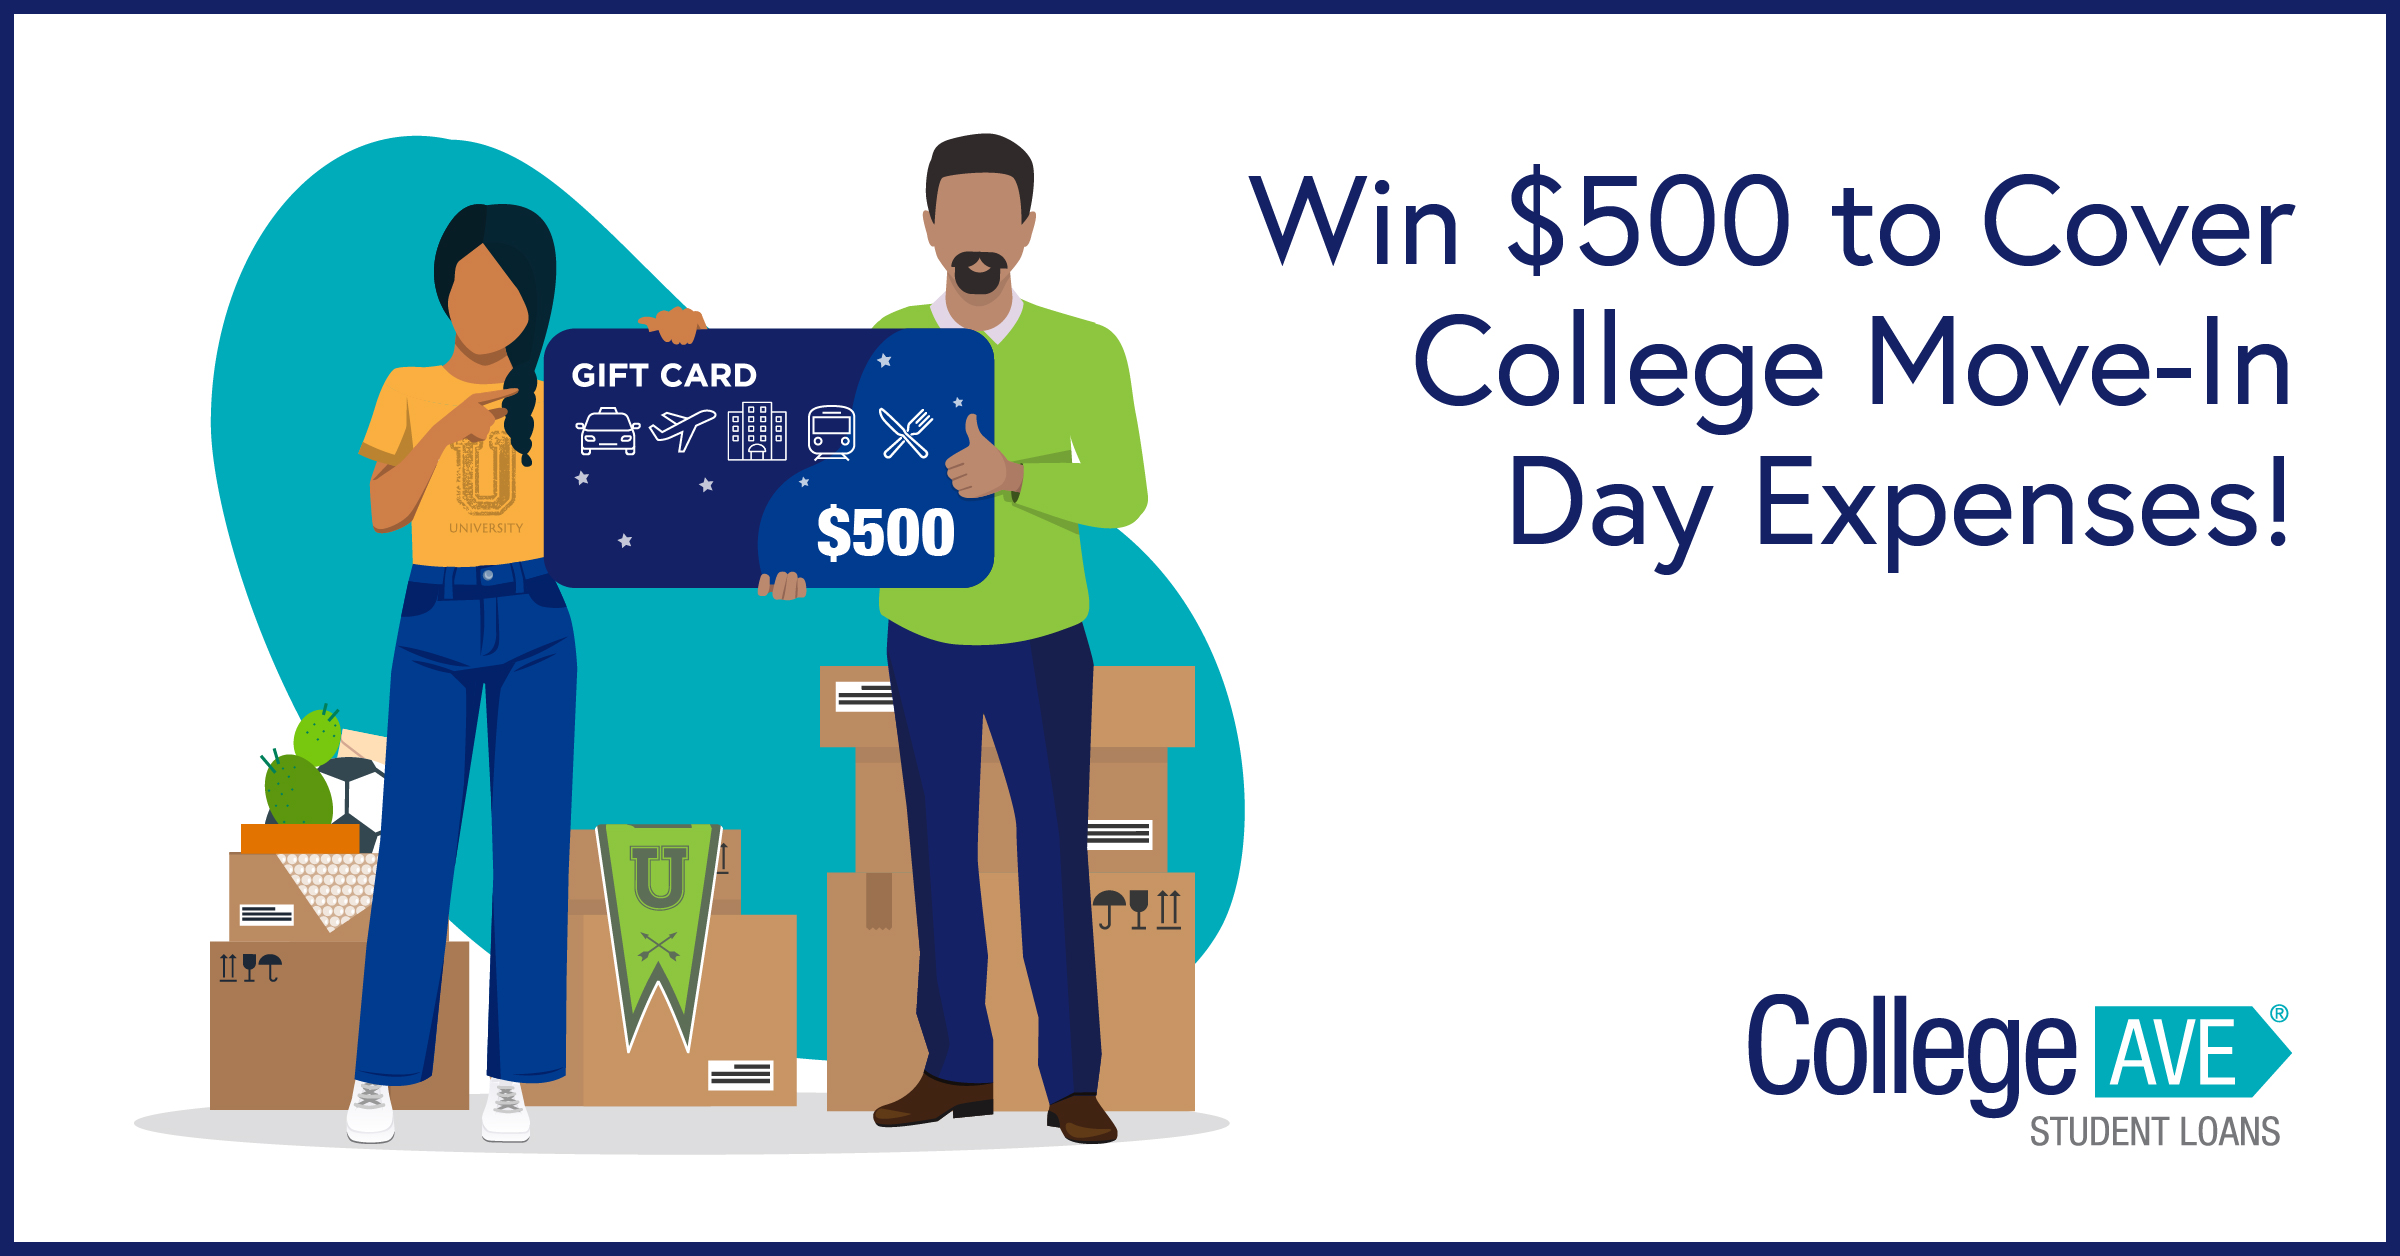 Win $500 to Cover College Move-In Day Expenses!